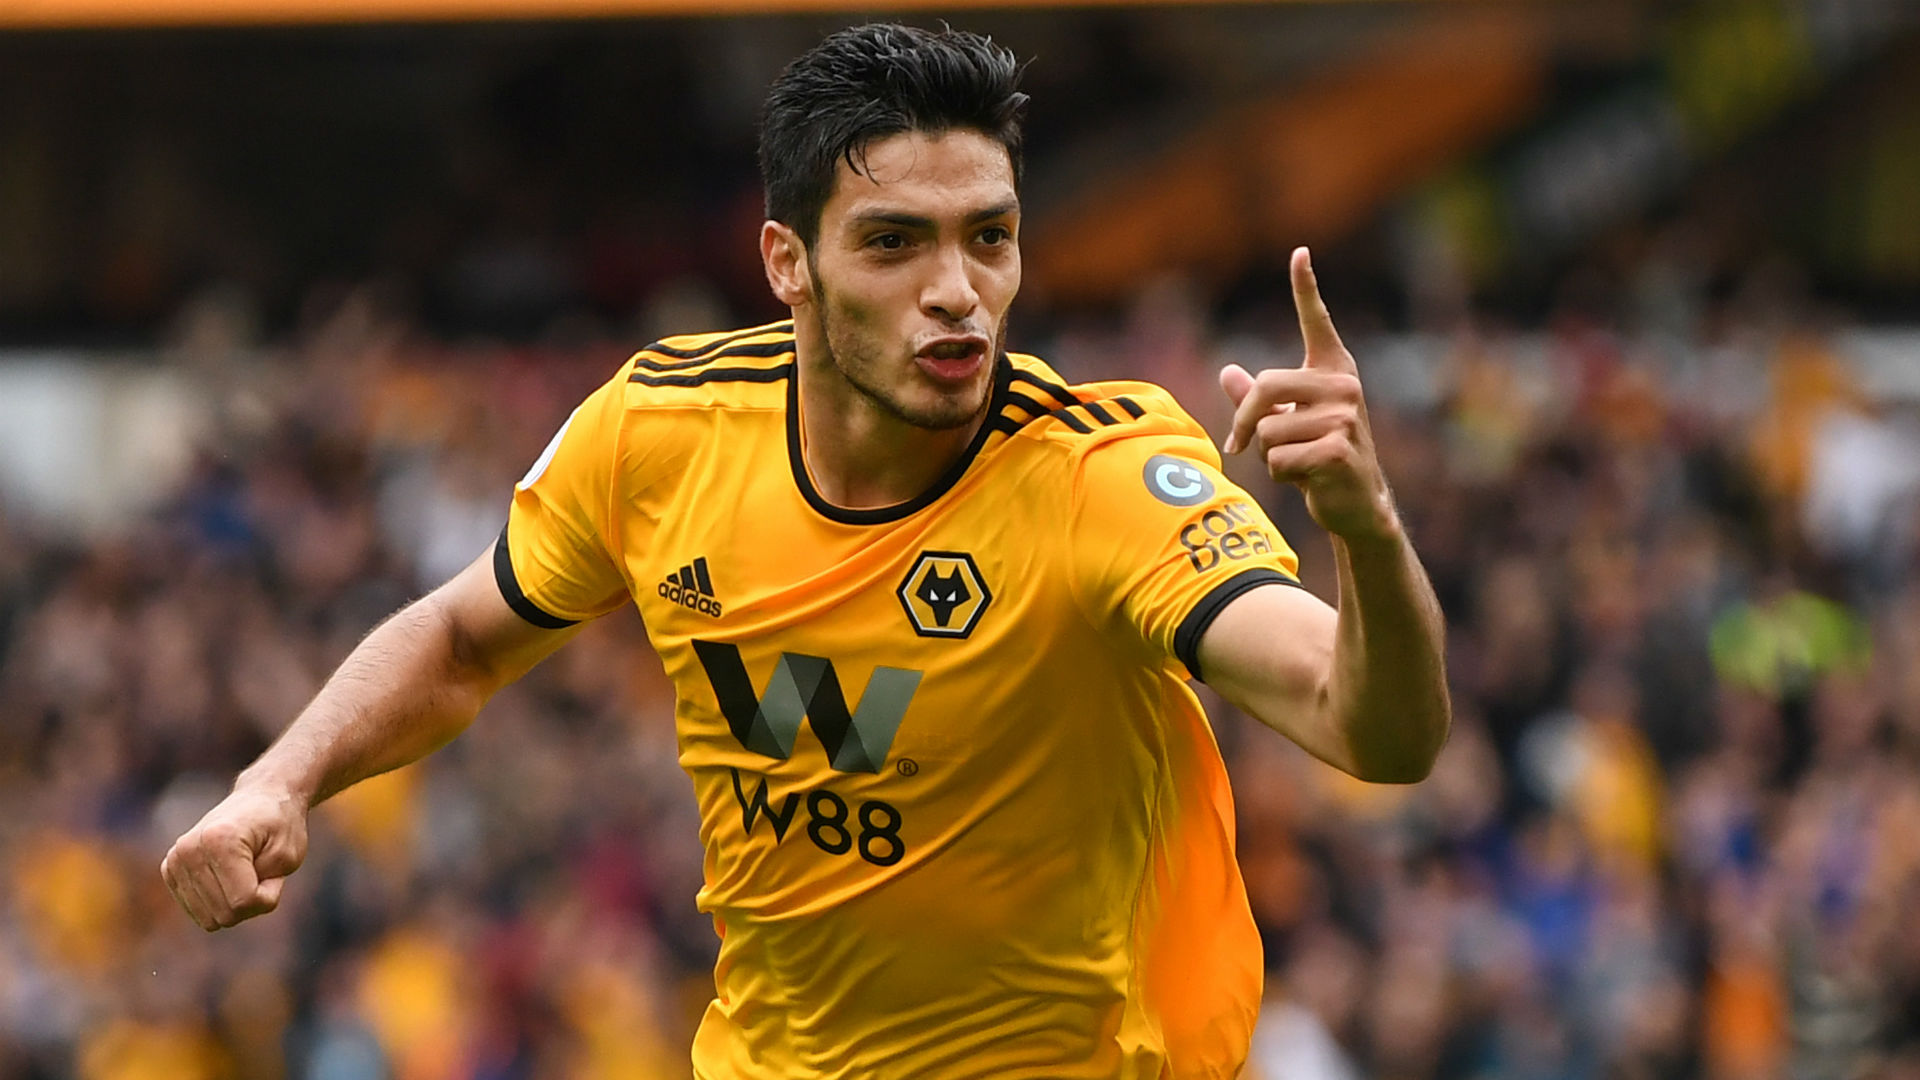 raul jimenez wolves manchester united fa cup 2019 py6wbsenmuc1j251vy2y8gmk